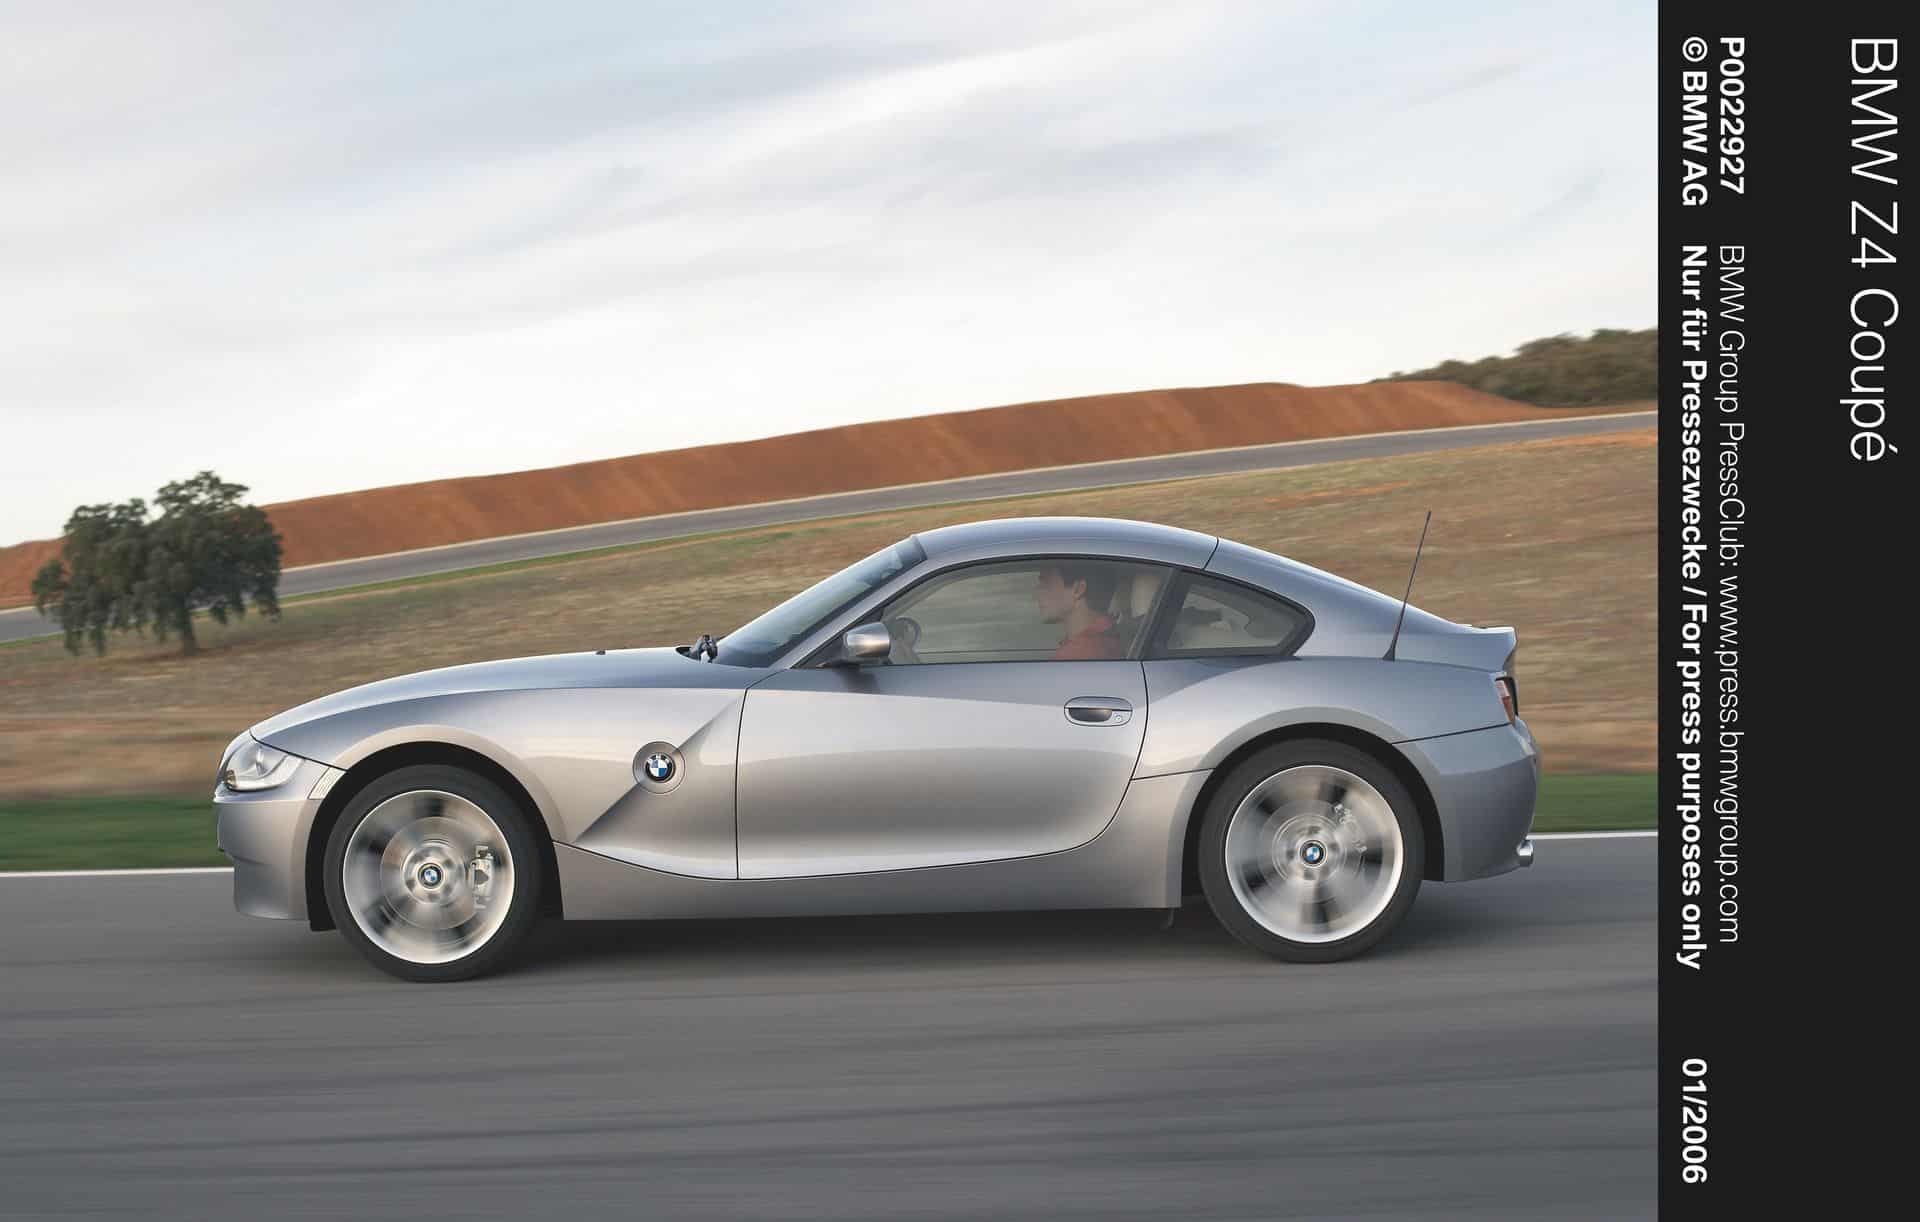 The BMW Z4 E85/86 is an underrated classic that was ahead of its time., by  Danny Oxyuk